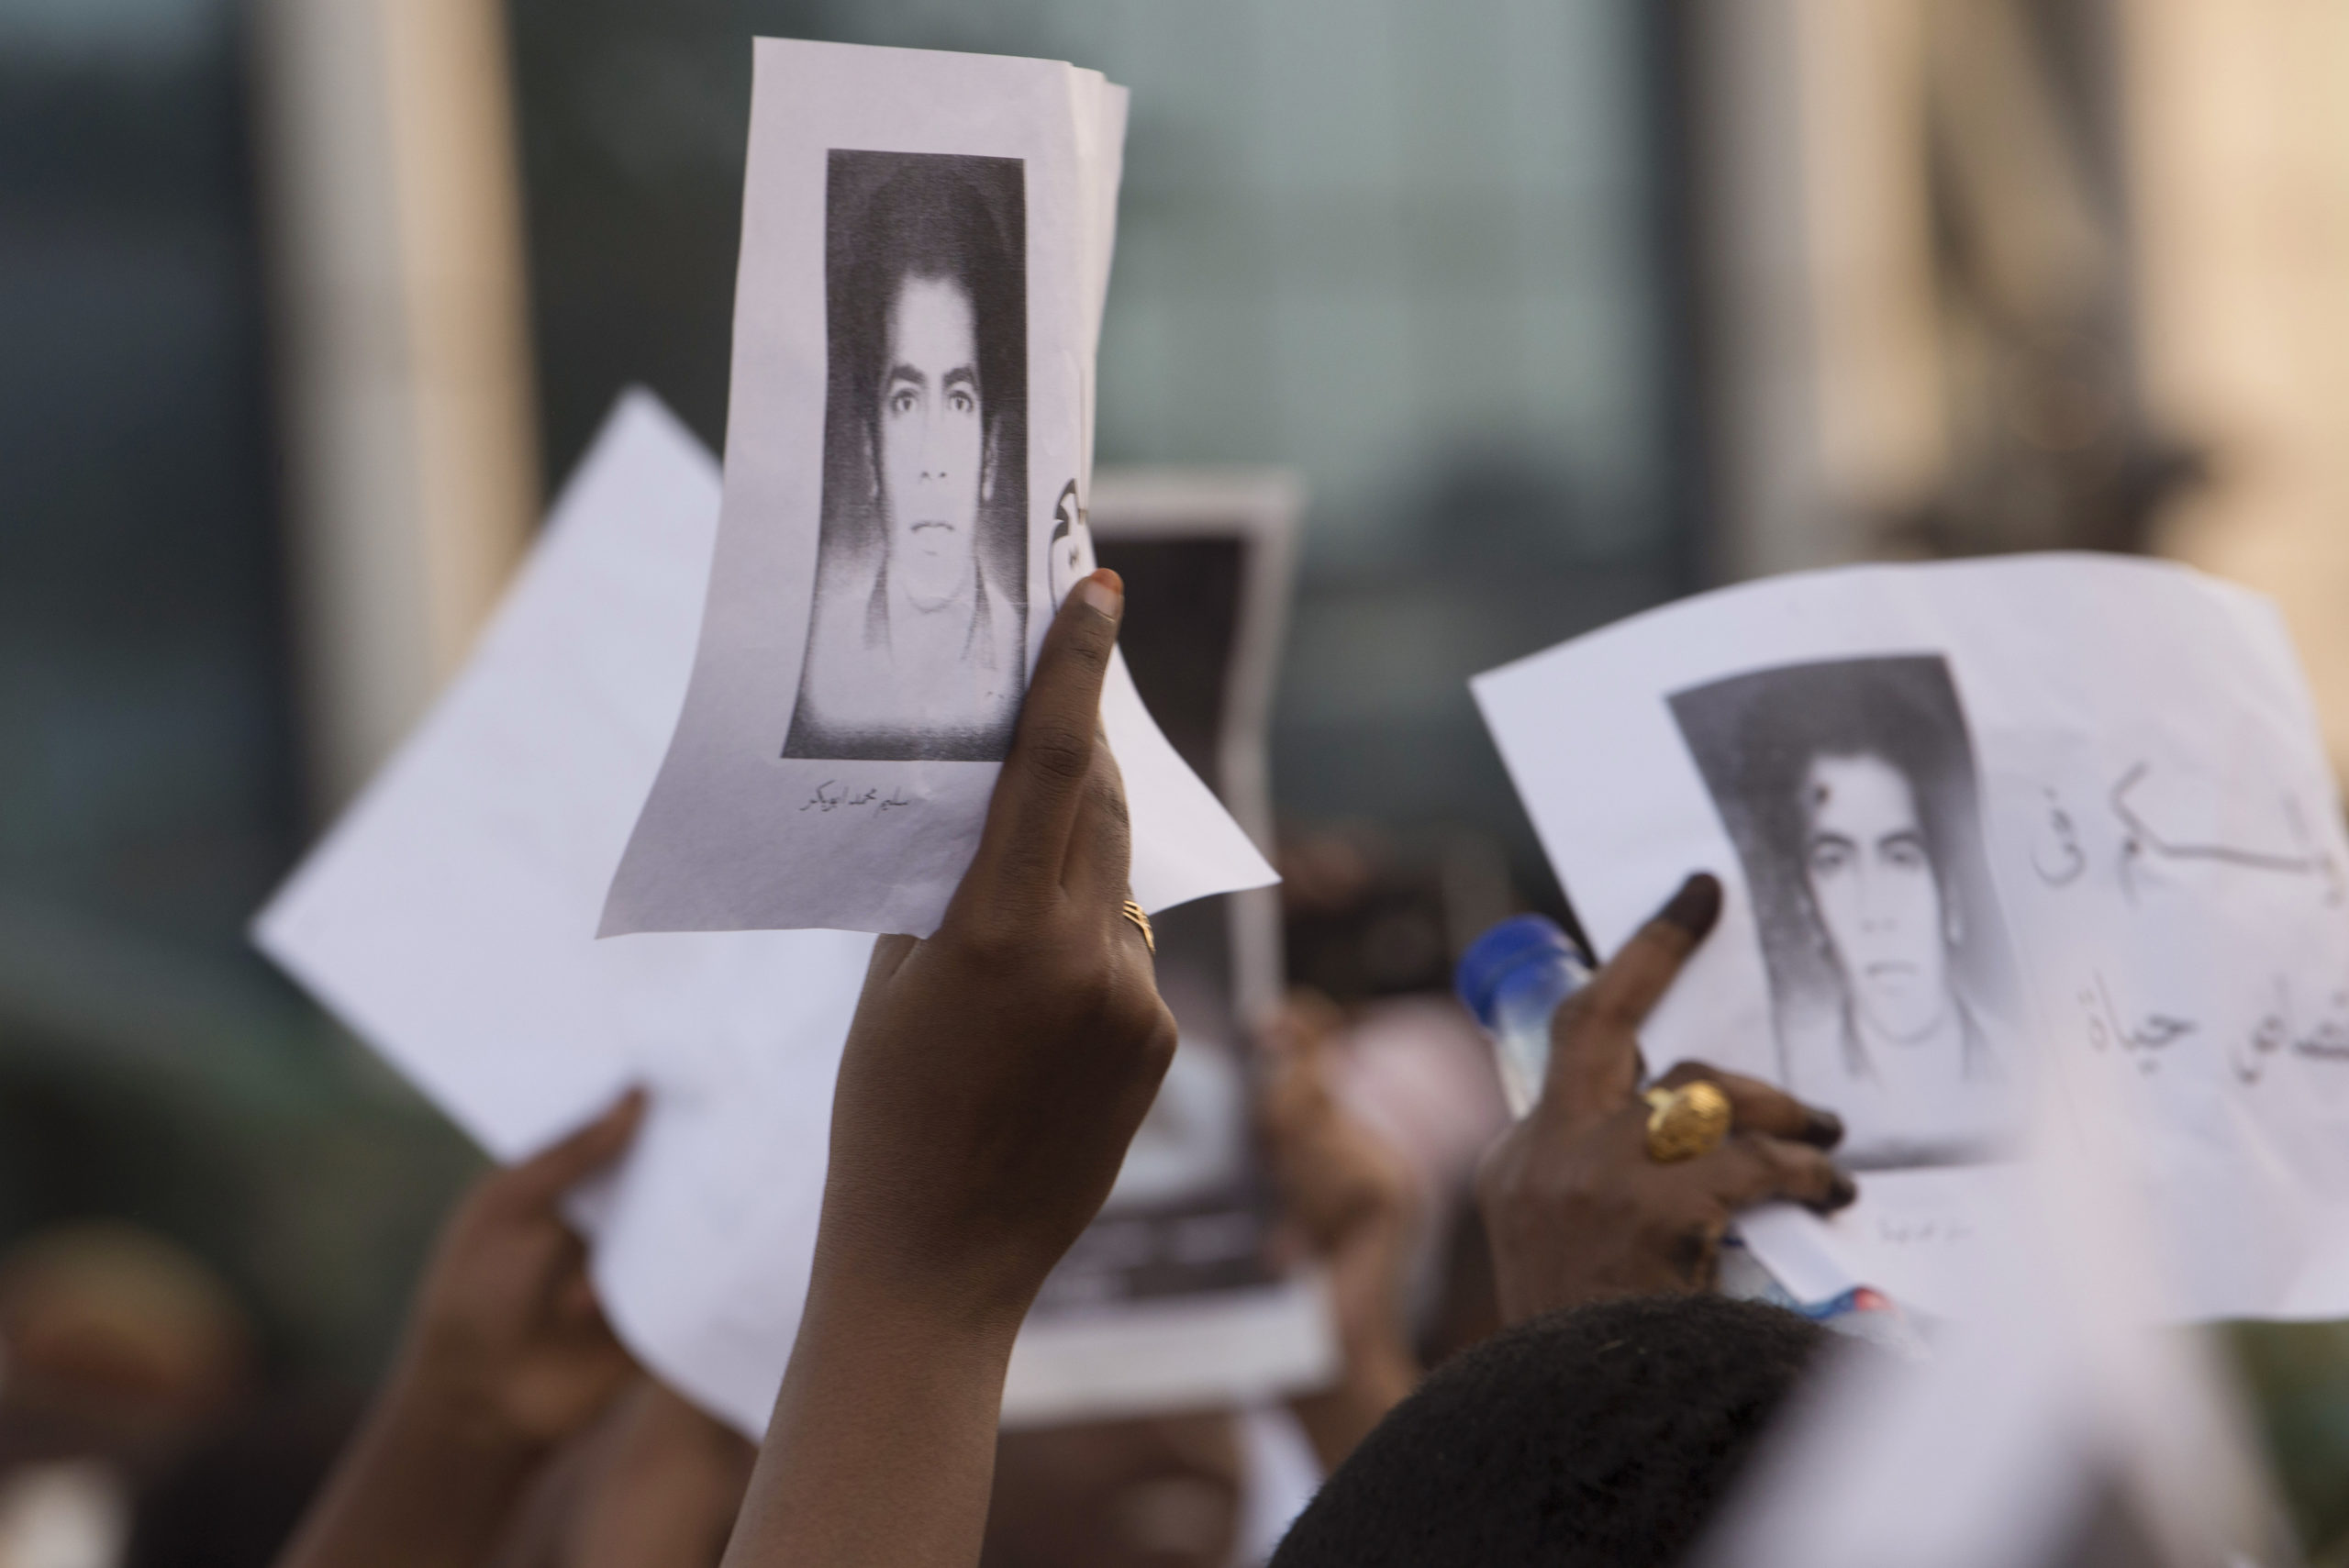 WEBINAR:  Pathways to Justice for Victims in Sudan, Lessons from Other African Countries